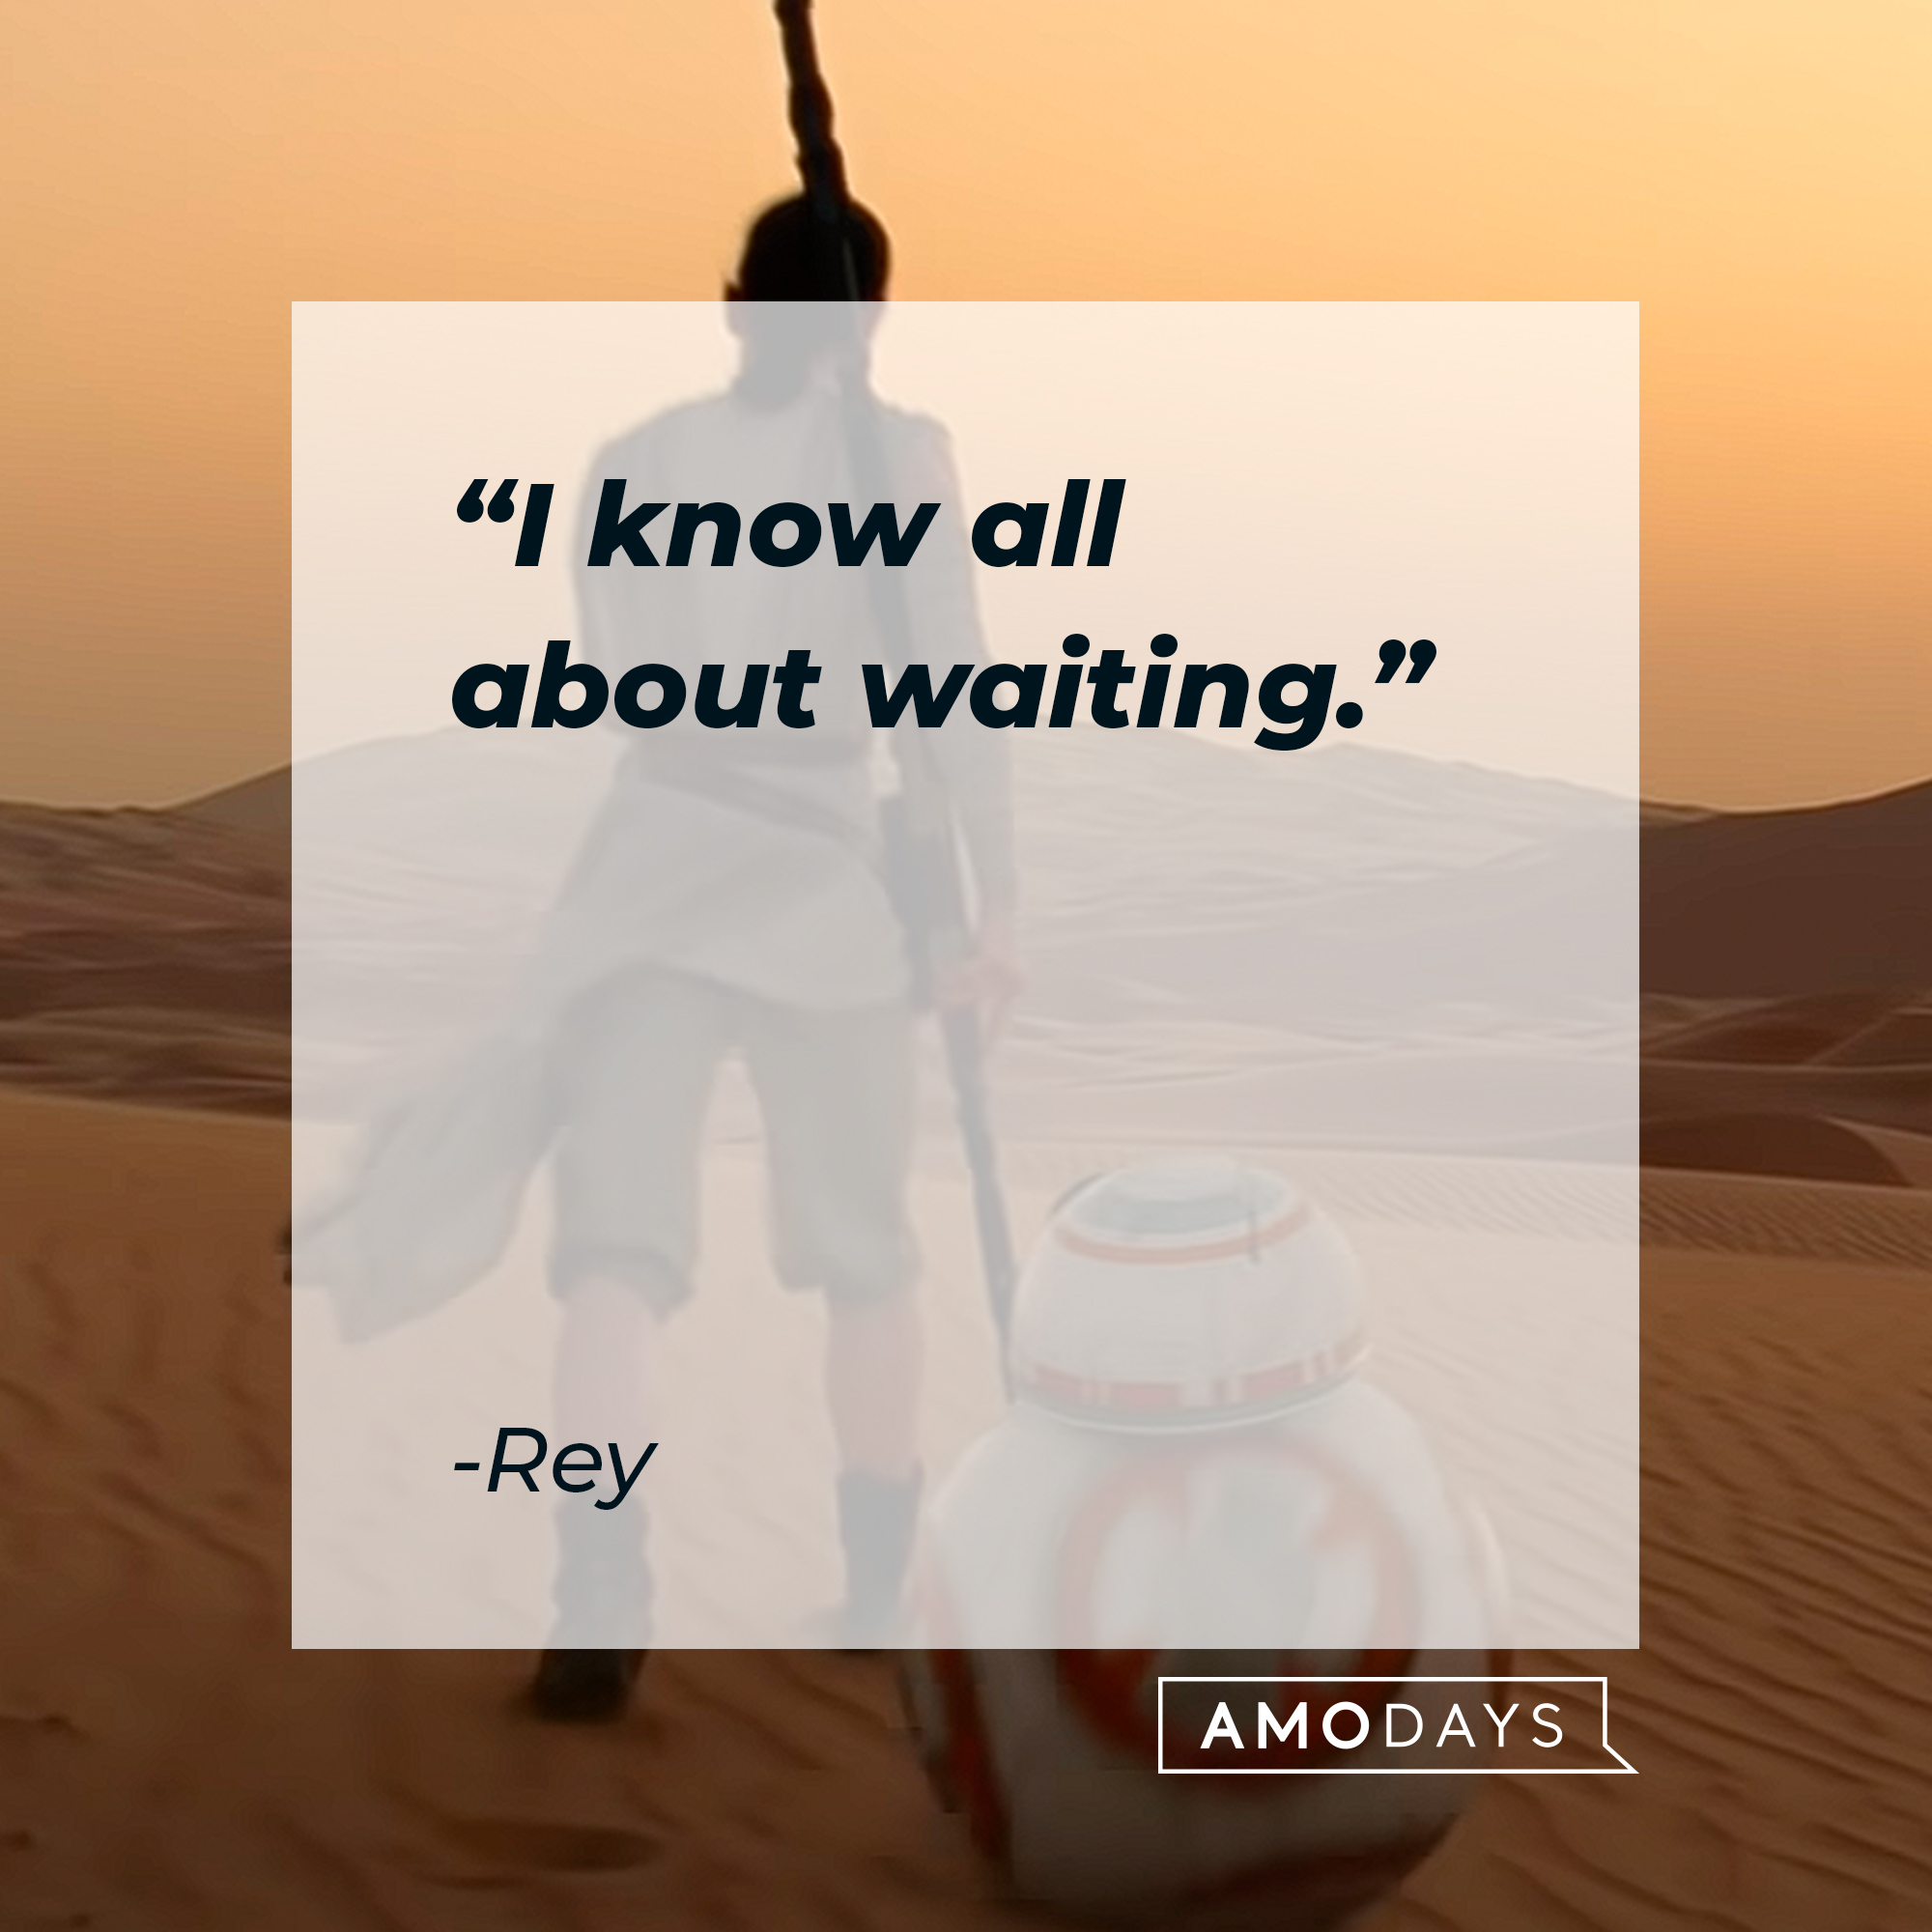 Rey's quote: "I know all about waiting."┃Source: youtube.com/StarWars